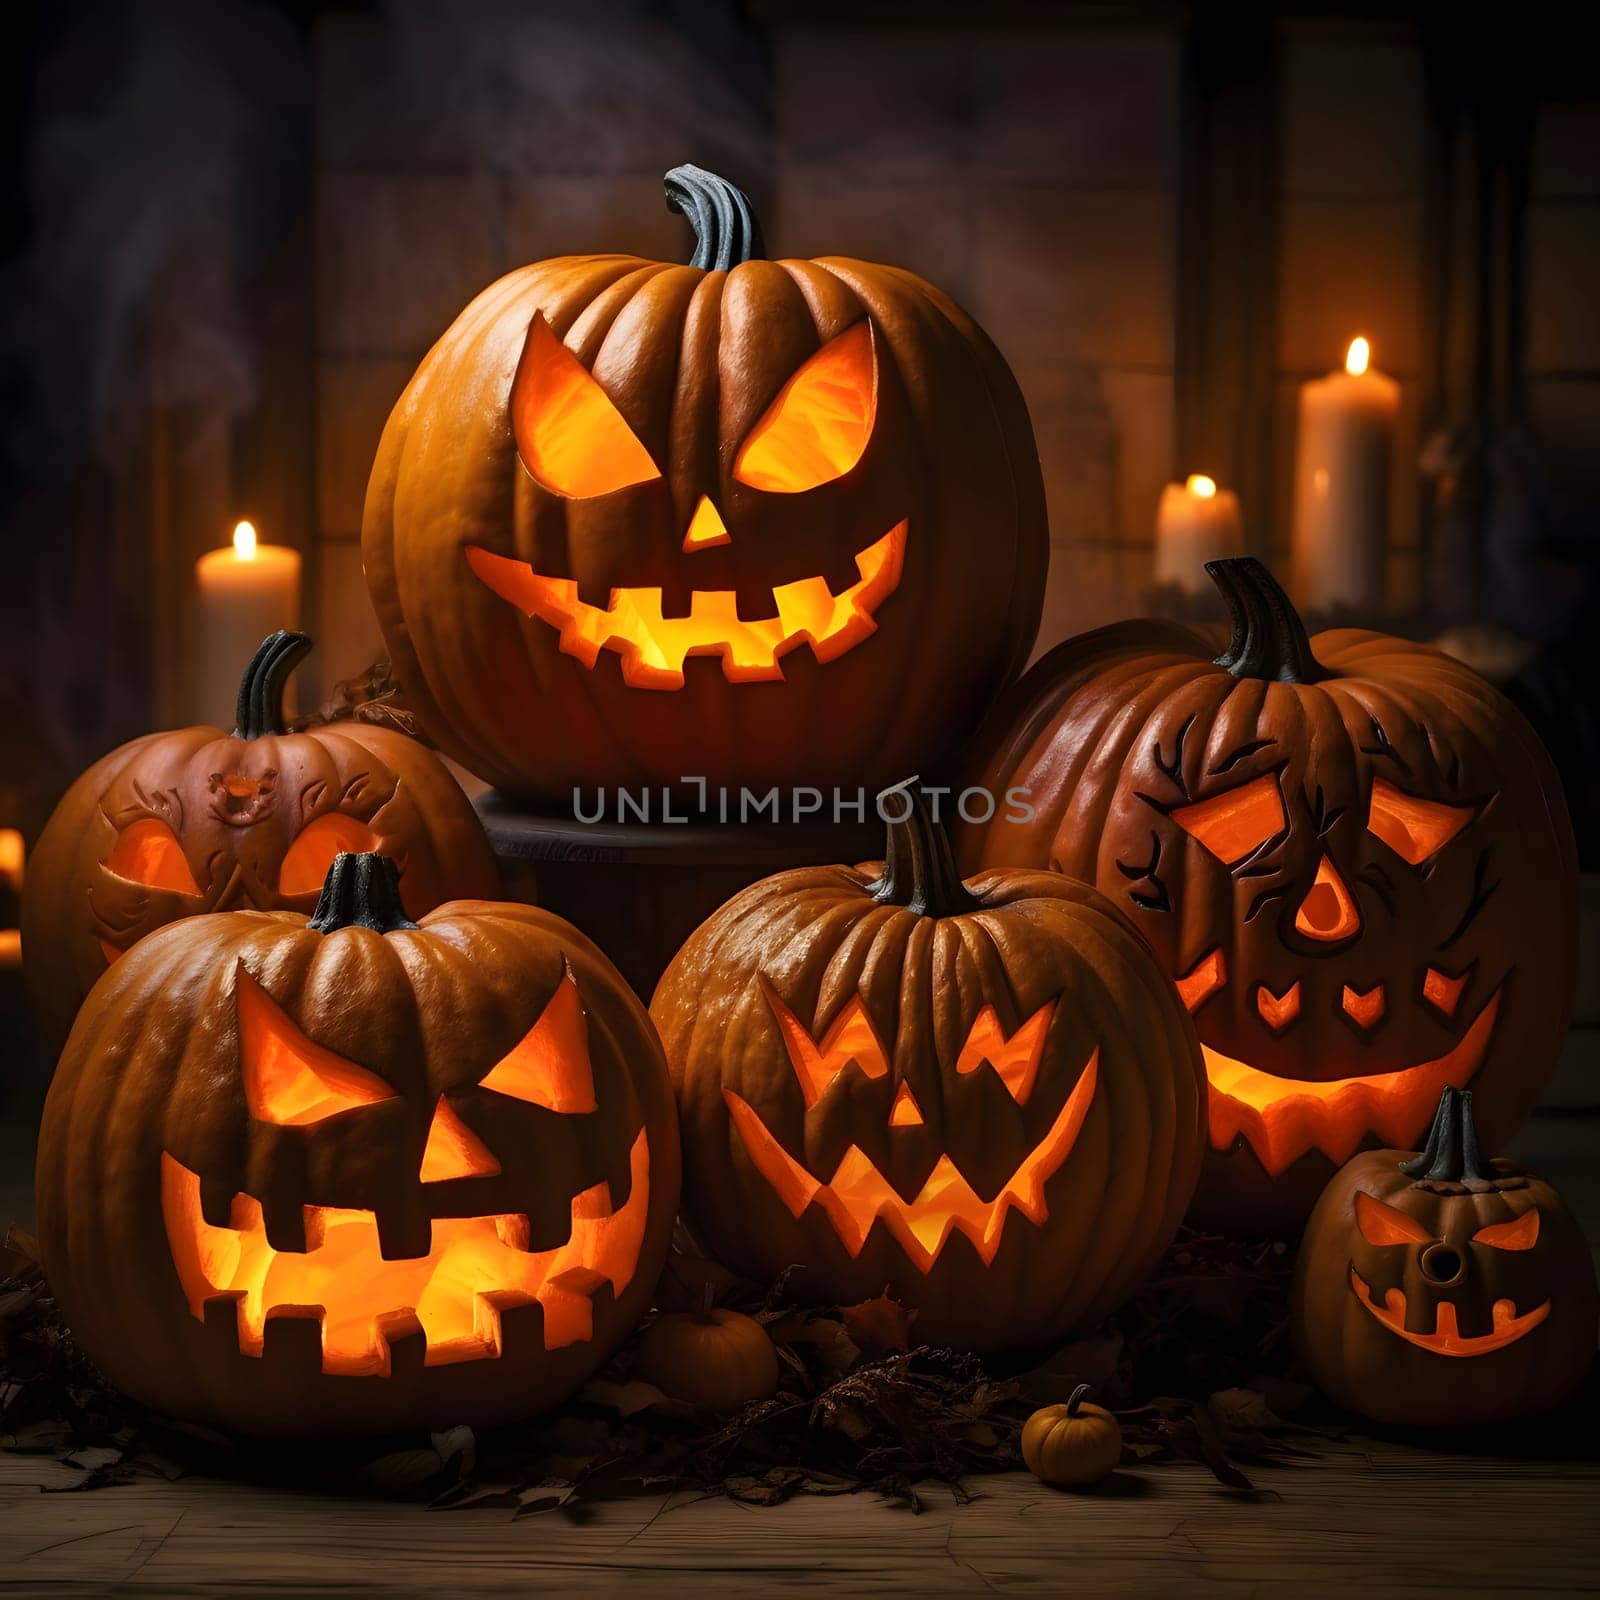 Six elegantly arranged glowing jack-o-lantern pumpkins, two candles in the background, smoke, dark room, a Halloween image. by ThemesS